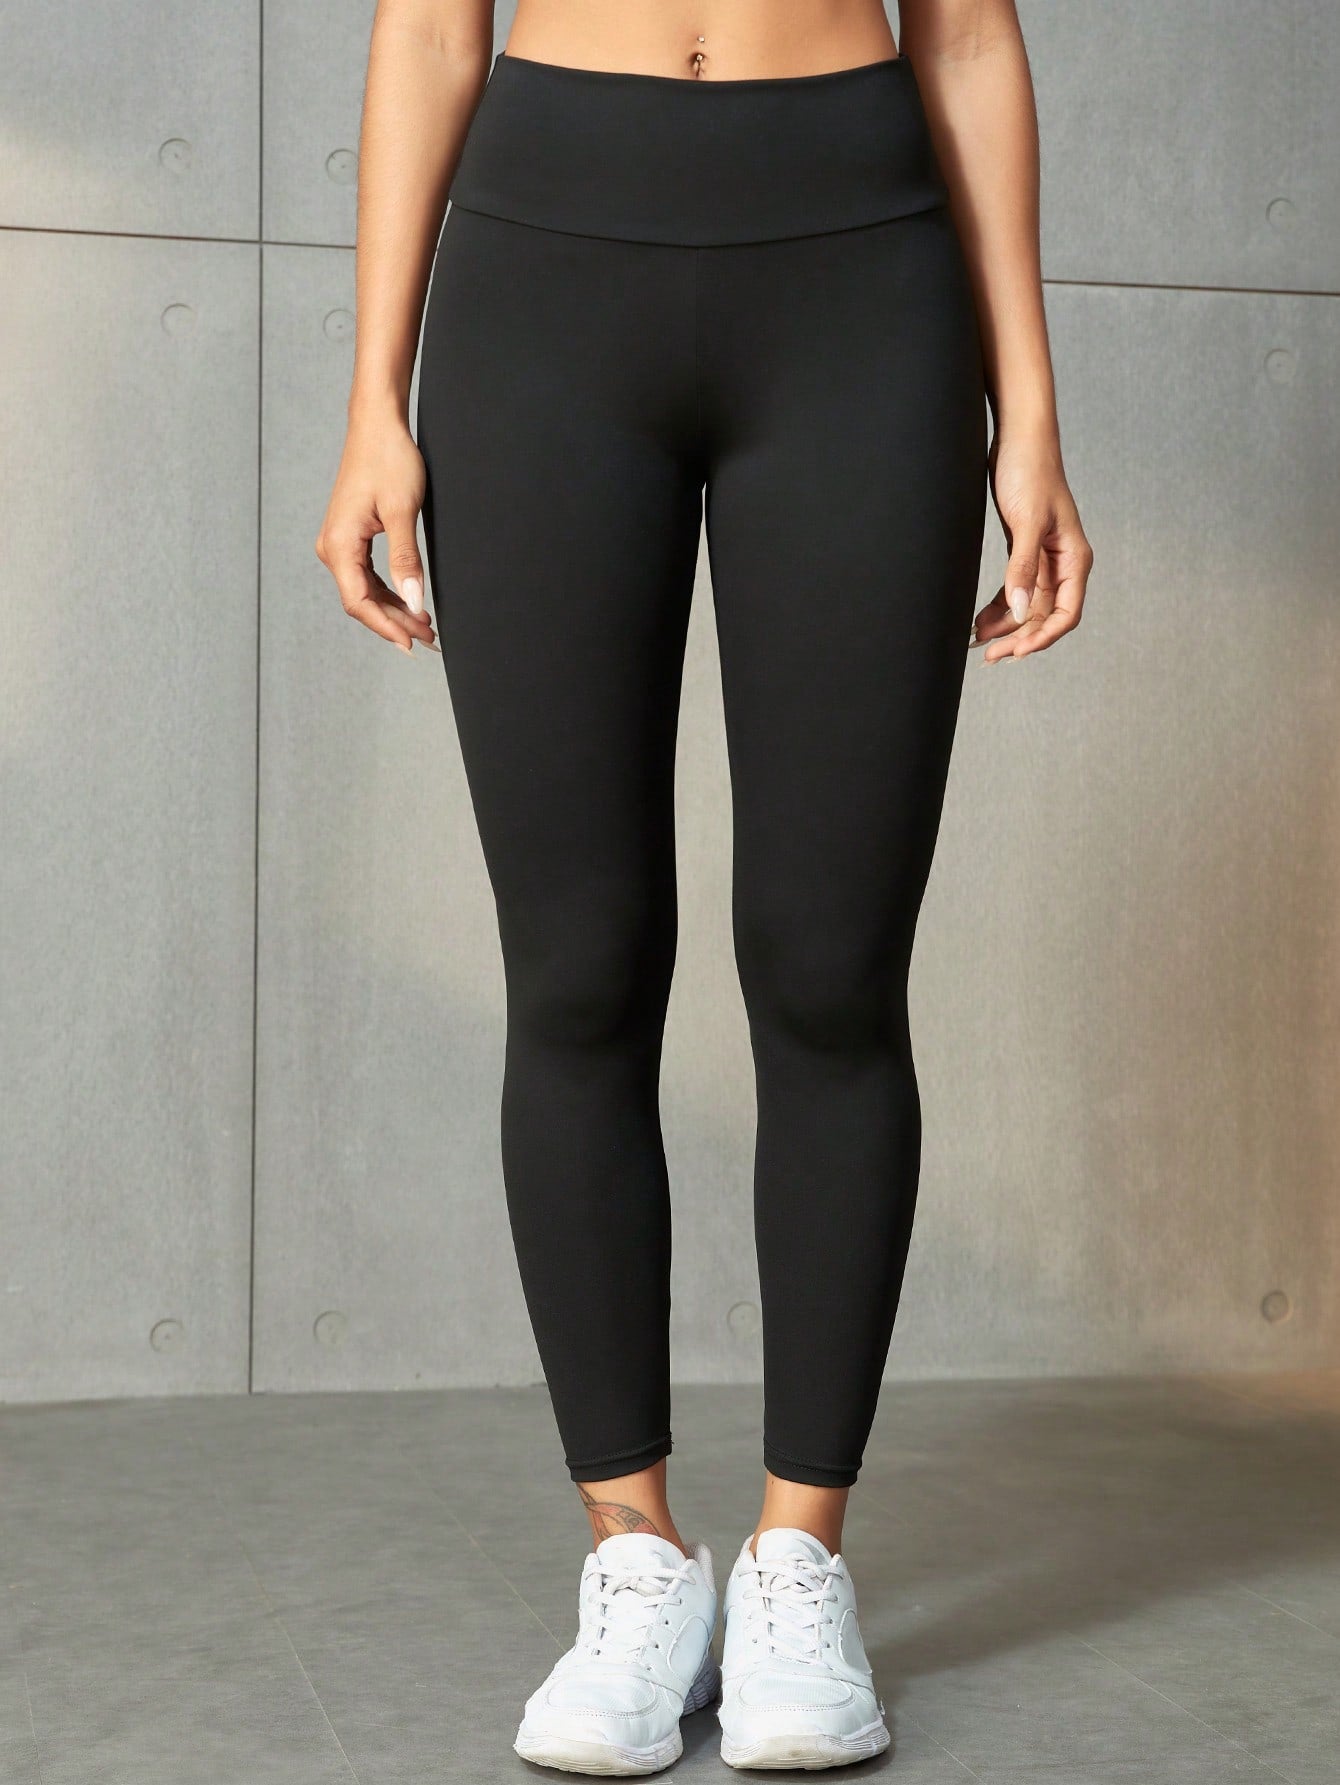 Stylish Butterfly Knot Back Leggings for Fashionable Workout Enthusiasts